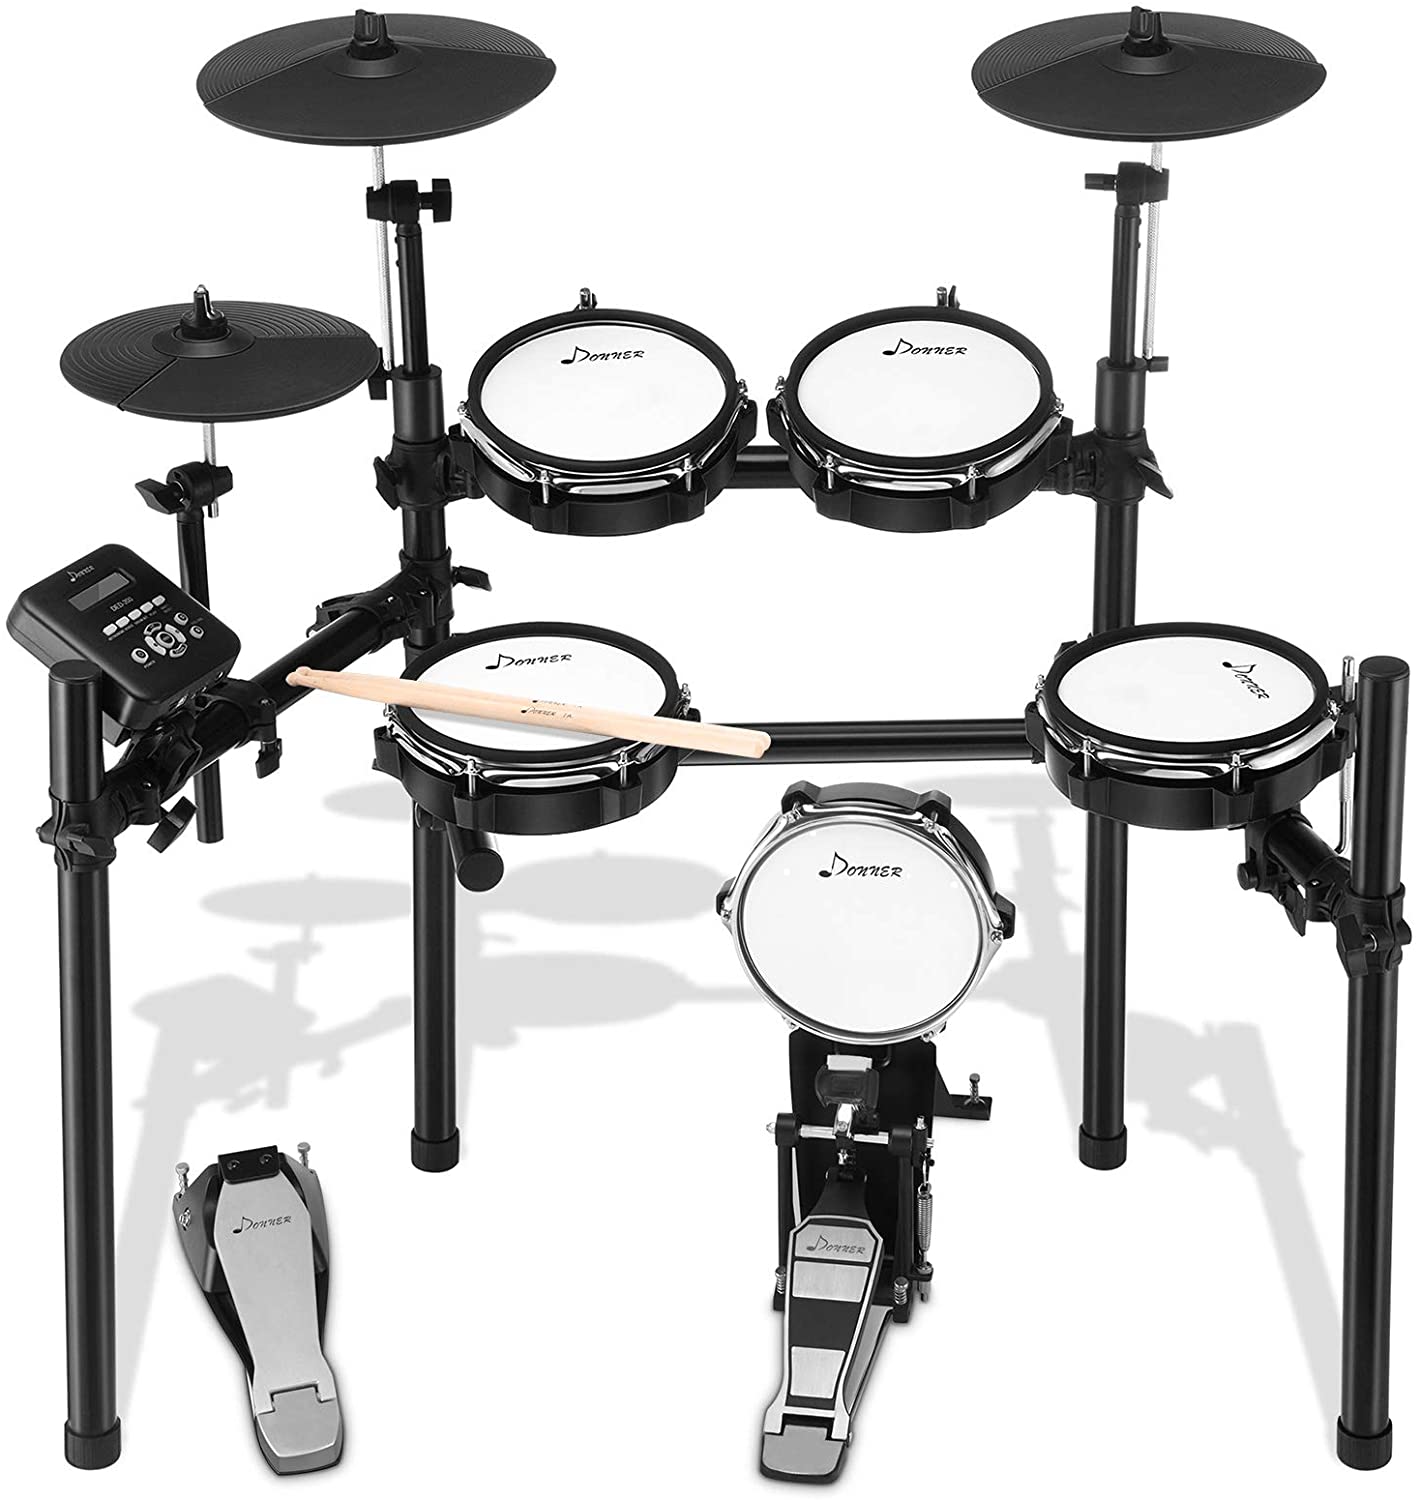 

Donner DED-200 Electric Drum Set Electronic Kit with 5 Drums 3 Cymbals, Electric Drum, Audio Line and Drum Stick